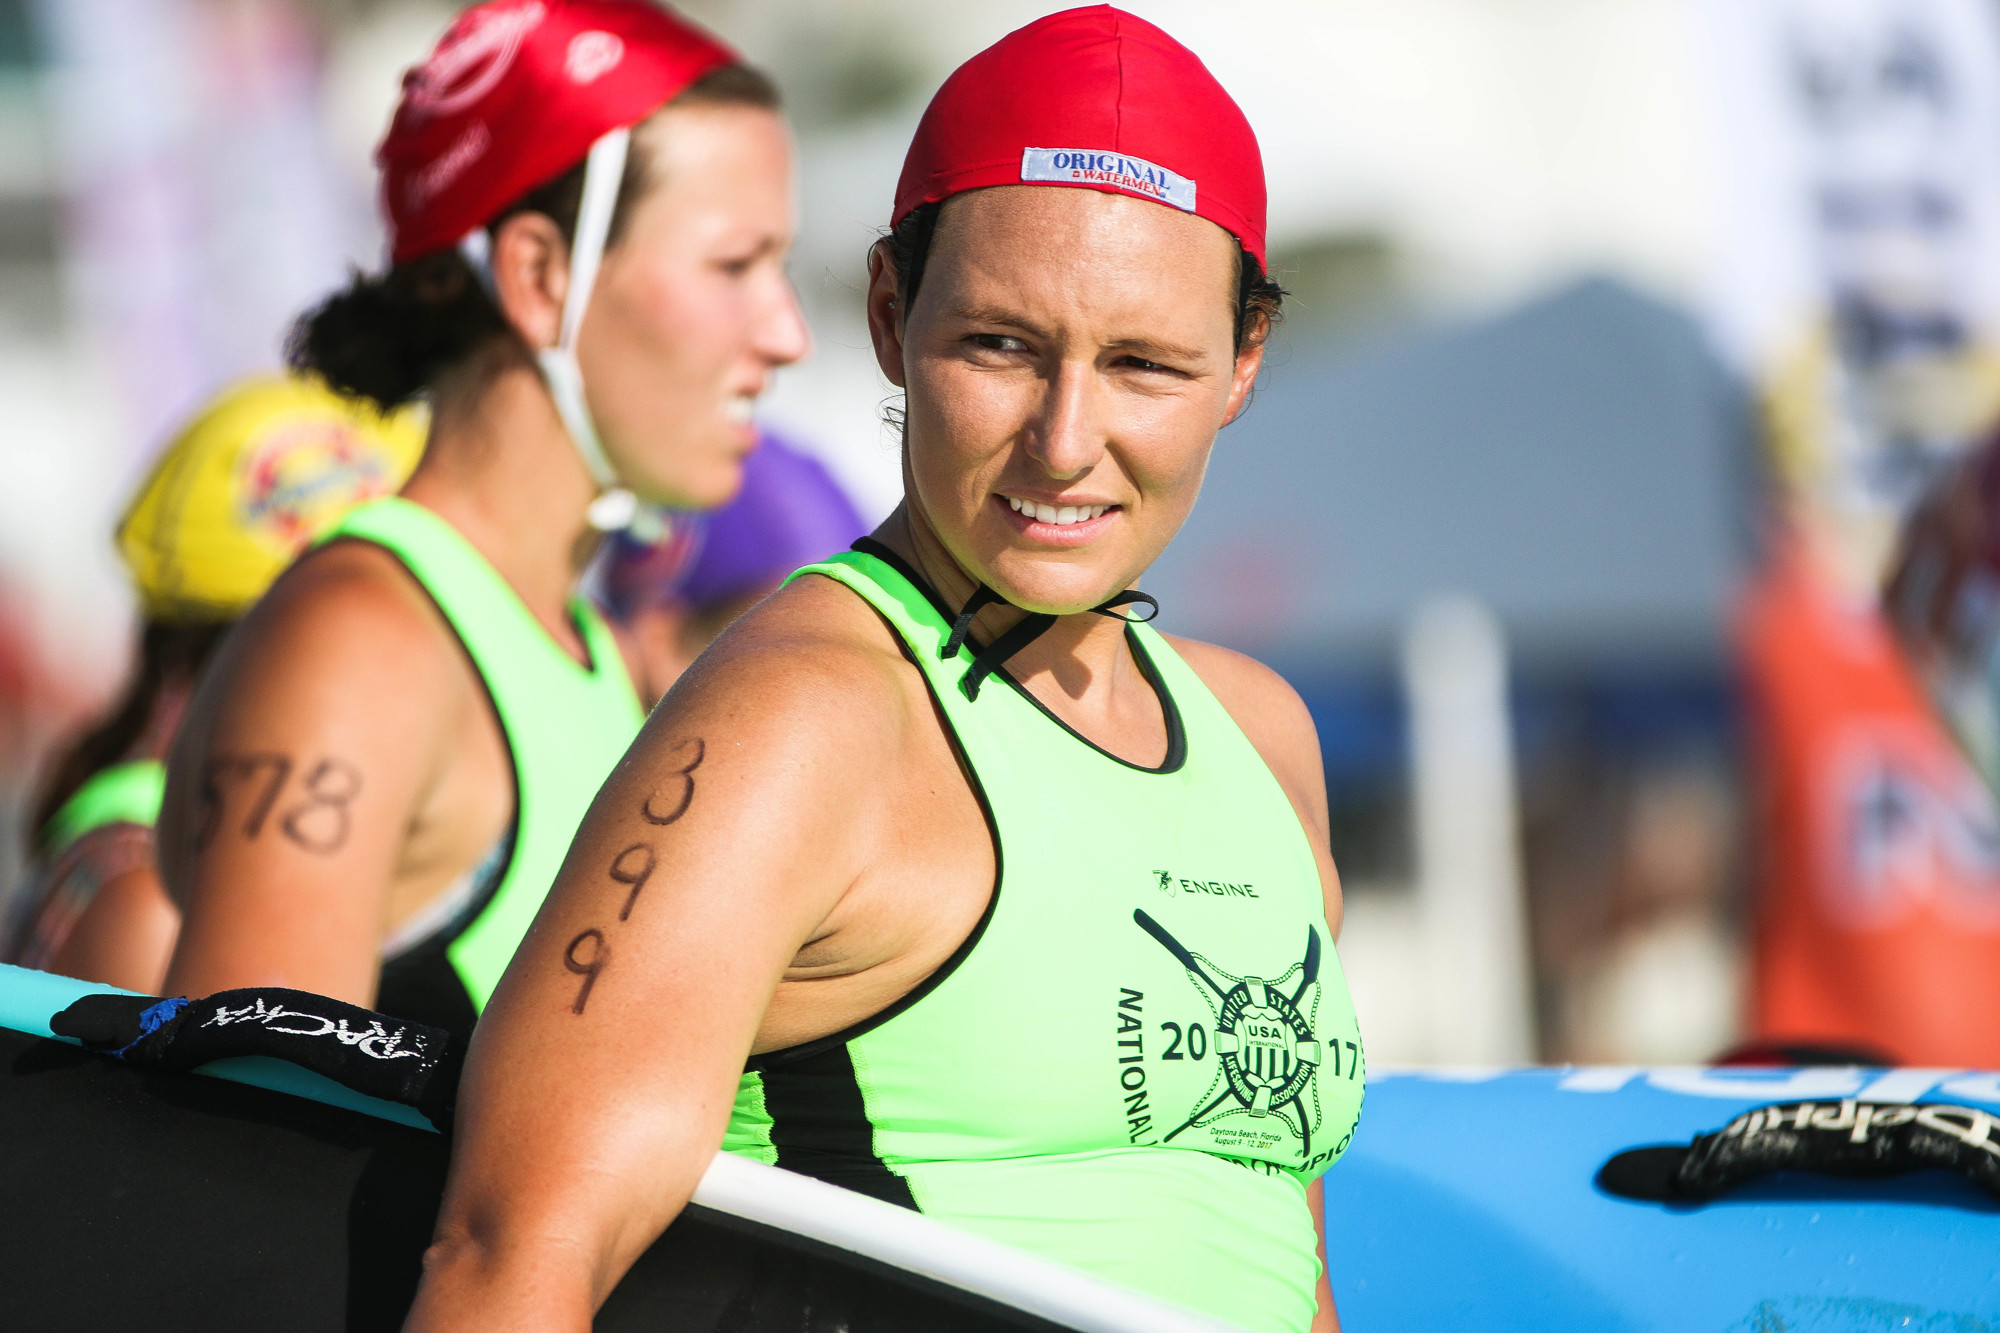 Hallie Petersohn prepares for the board race at the USLA National Lifeguard Championships. Photo by Paige Wilson